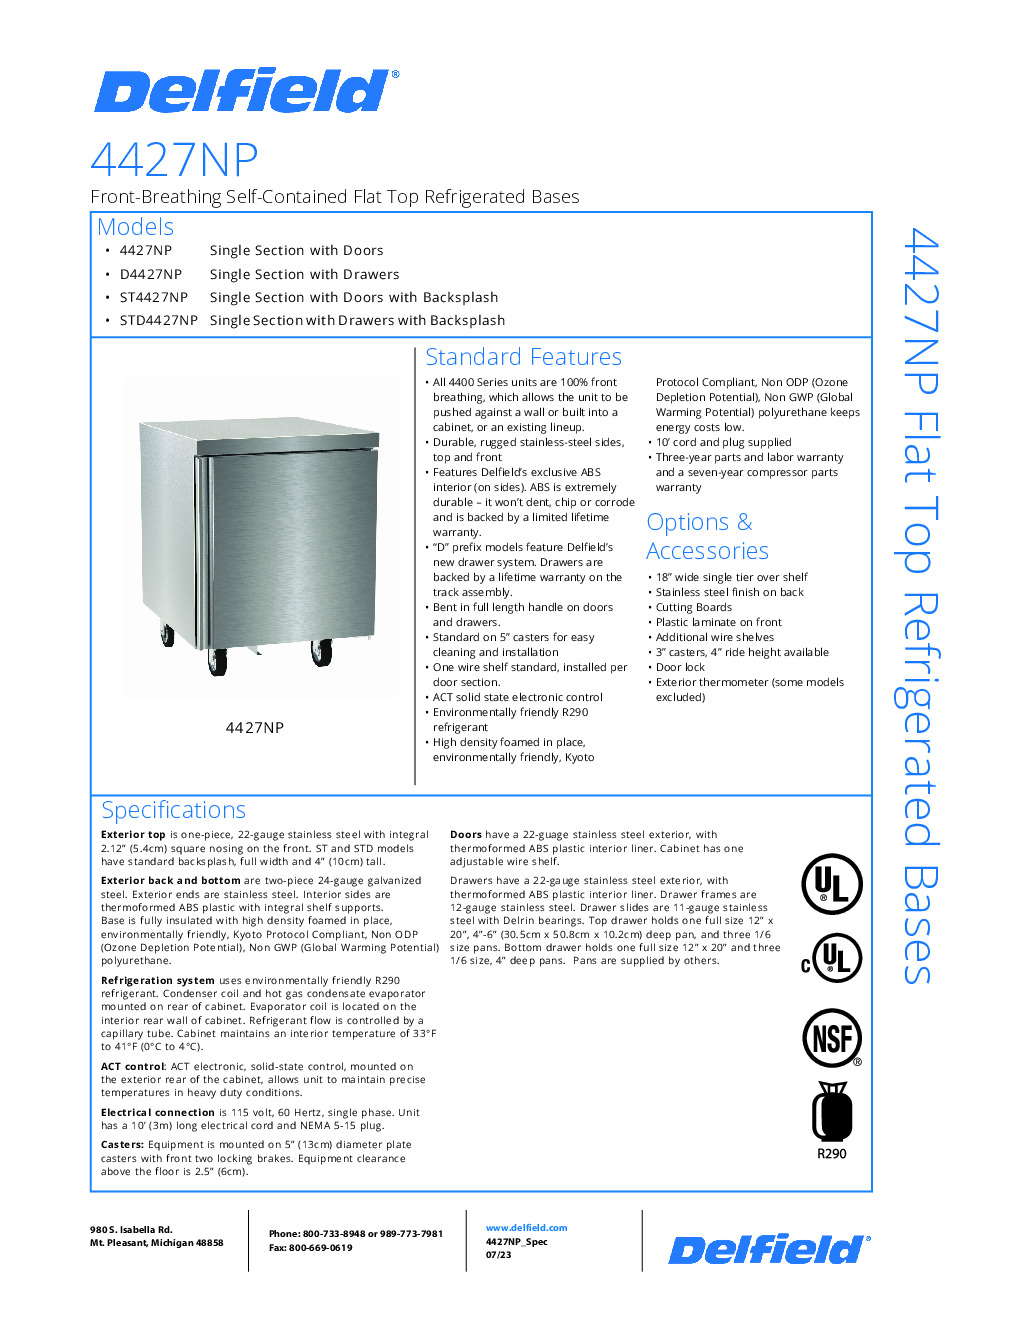 Delfield STD4427NP Work Top Refrigerated Counter